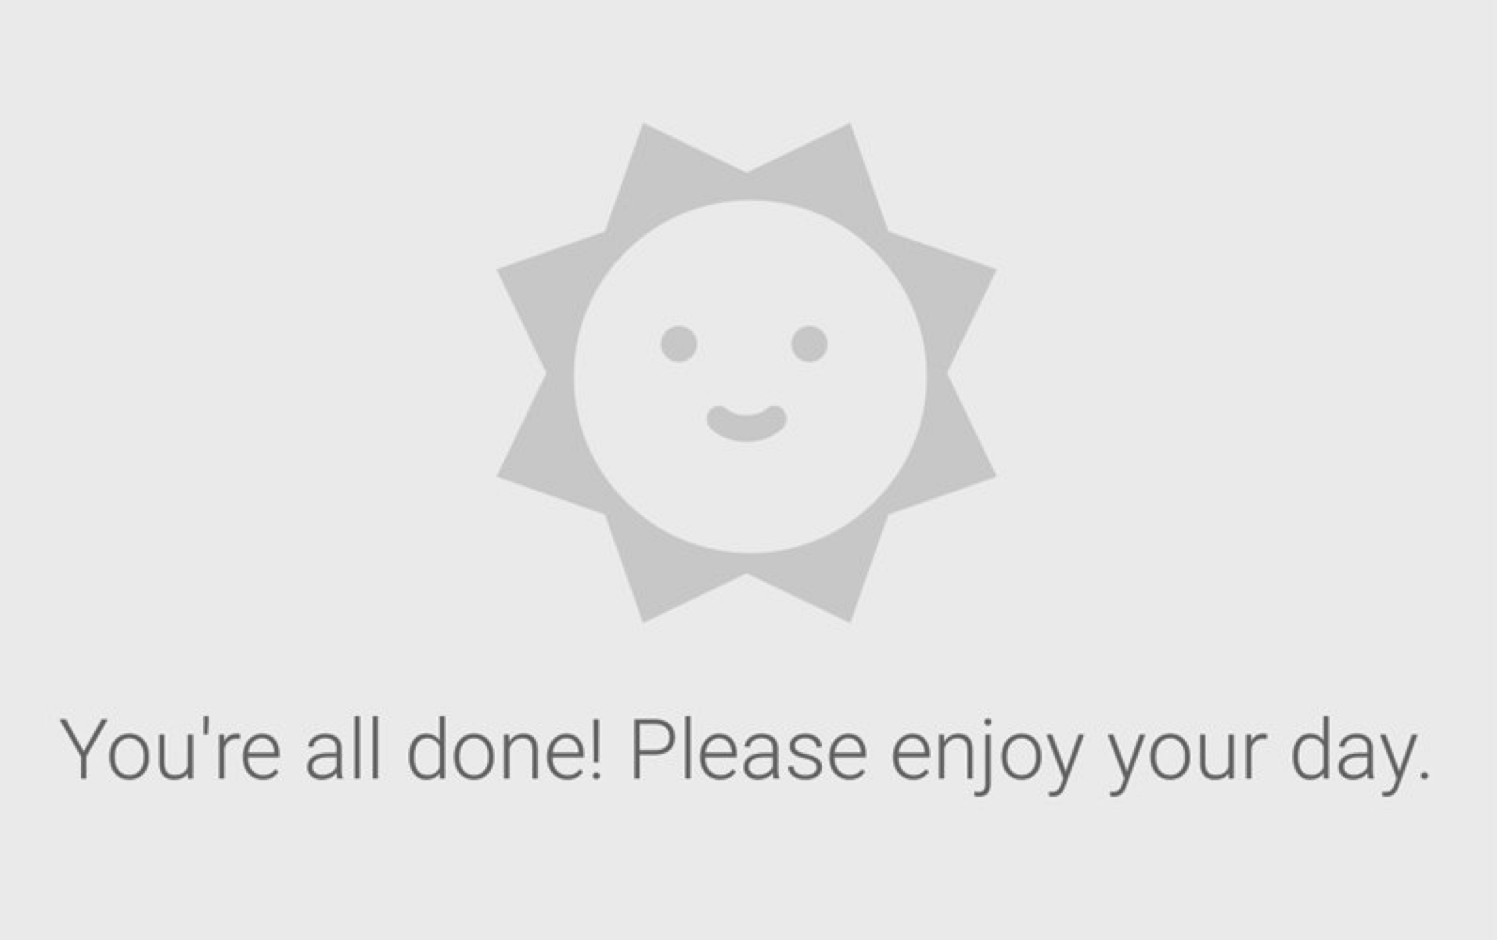 Smiling sun from Gmail mobile app